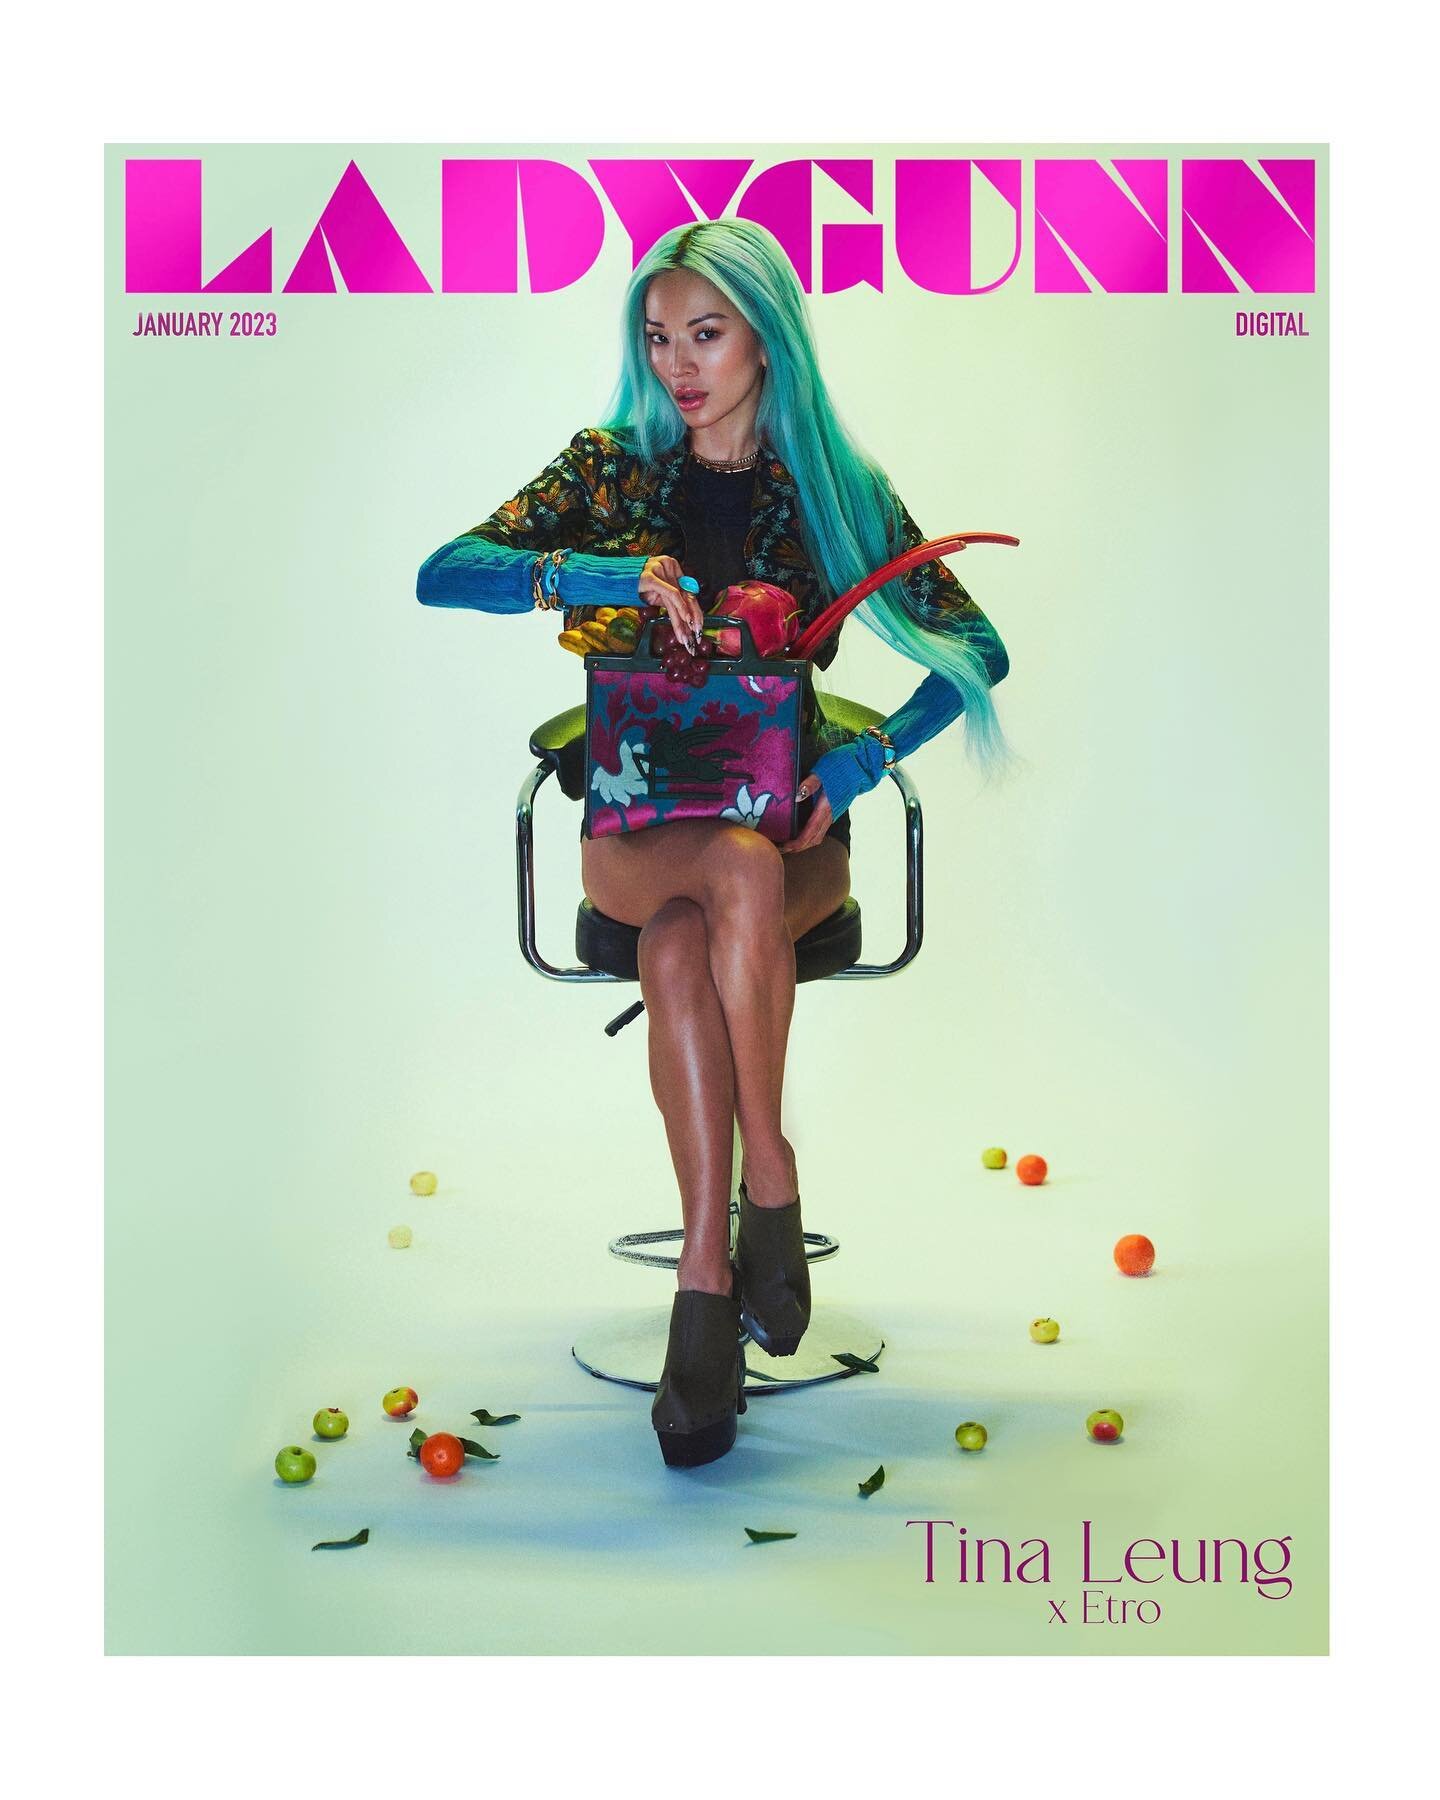 Wigbar Custom #hairextensions used for New cover of @ladygunn with the amazing @tinaleung
Photos // Caleb &amp; Gladys @calebandgladys
Creative Direction + Styling // Phil Gomez @styledbyphil
Editorial Director // Alex Blynn @alexblynn
Makeup // Colb